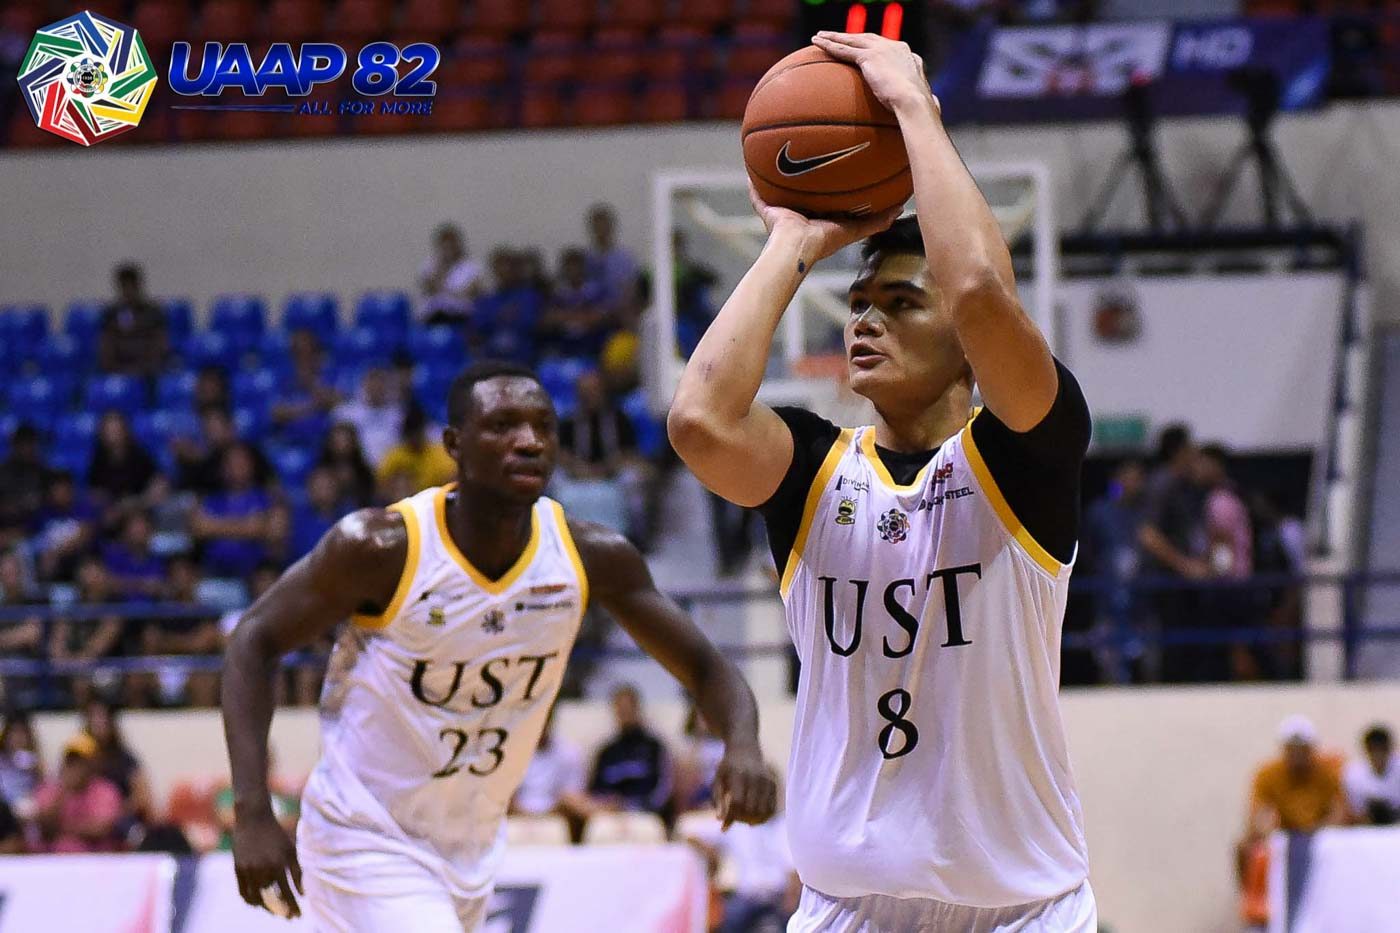 HOT SURPRISE. UST coach Aldin Ayo on Sherwin Concepcion, who fired all of his 12 points from three-point range: 'Maganda na yung mga rookies namin they are introducing themselves one by one.' Photo release